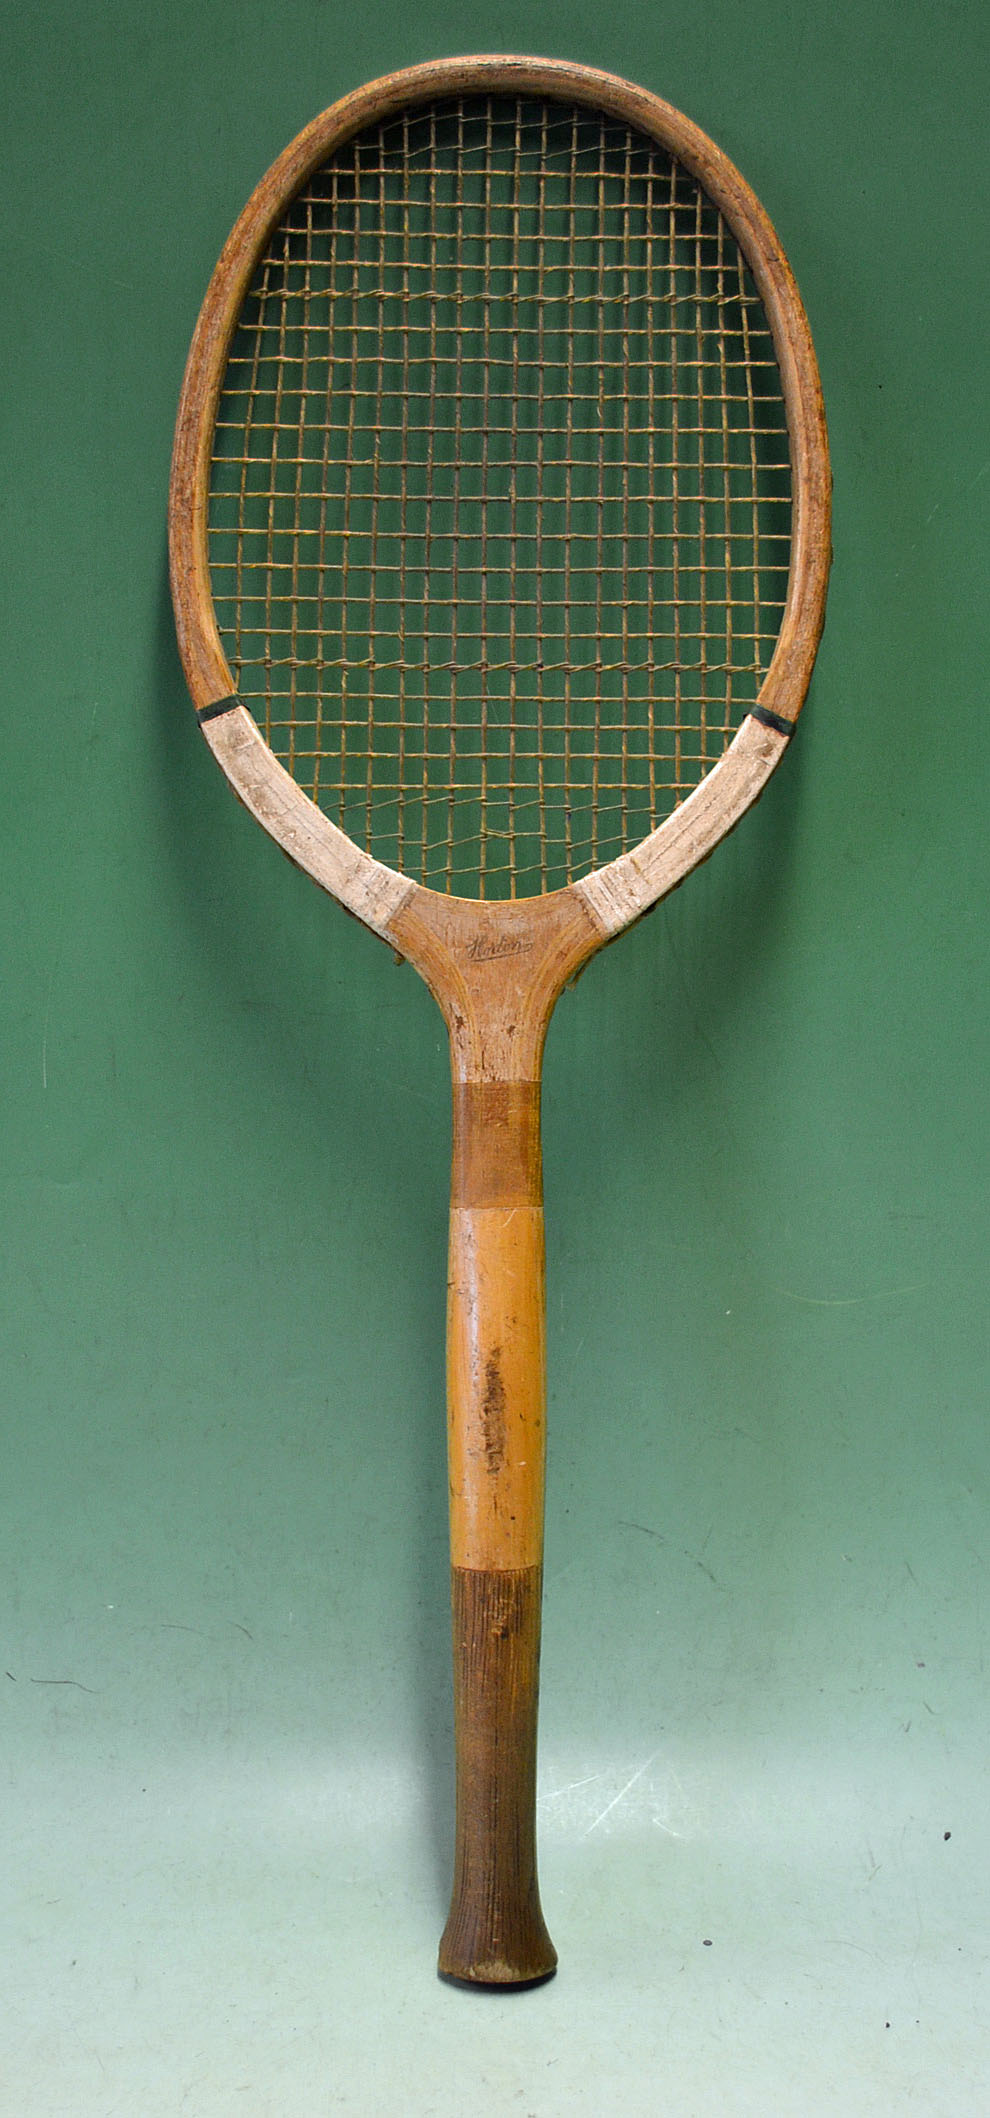 Horton Fantail Wooden Tennis Racket c1925 original gut strings intact, an oval head with concave